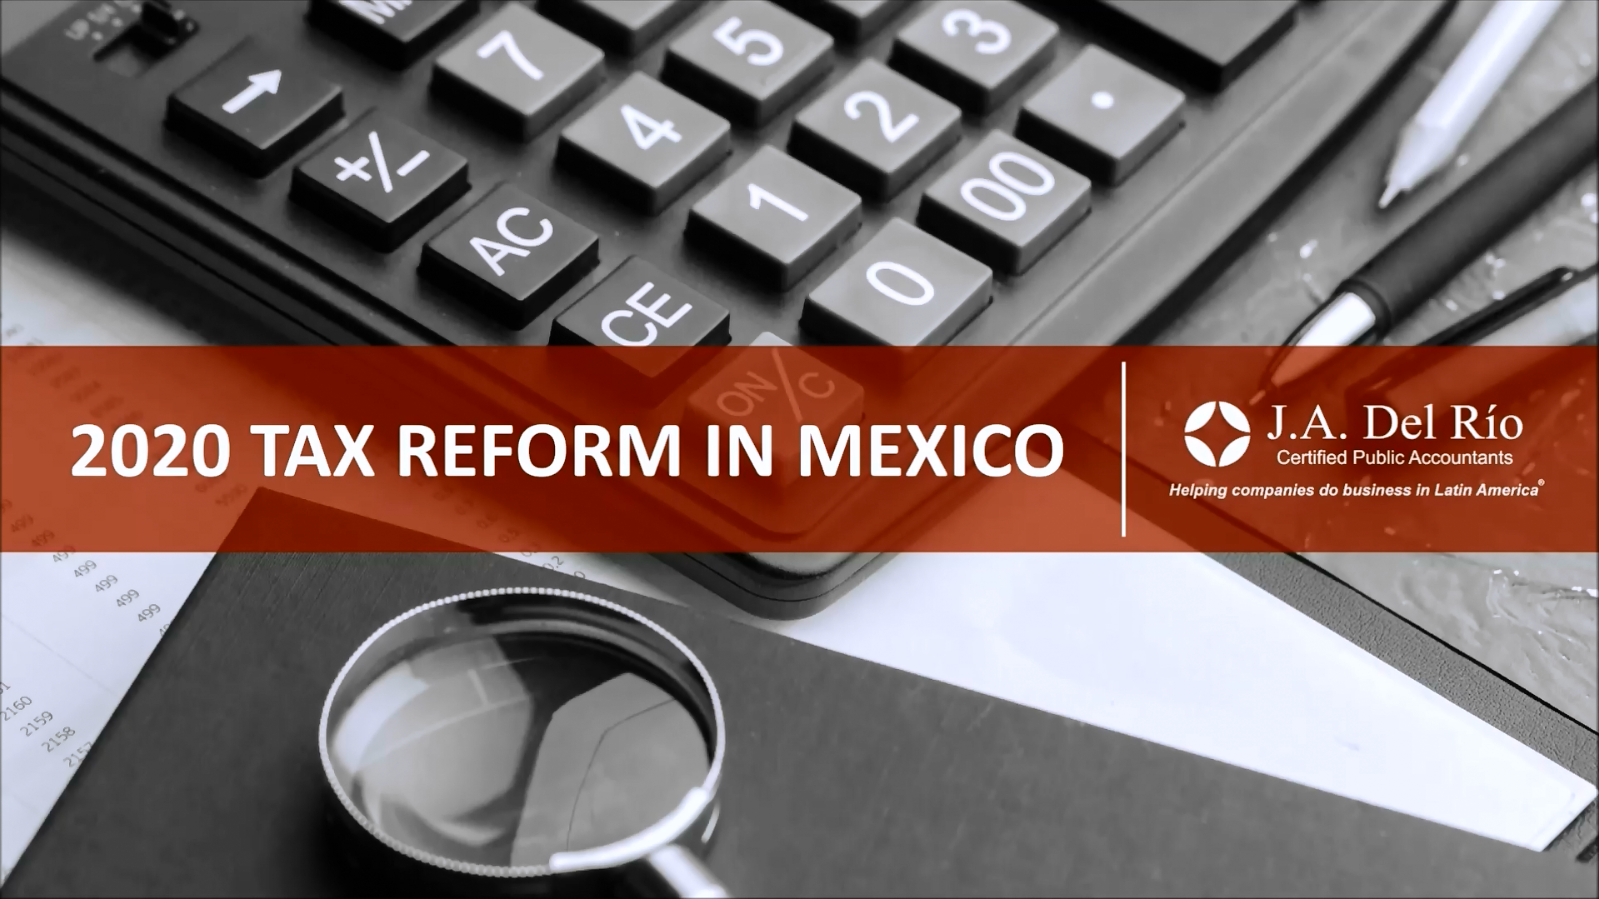 Webinar: 2020 Tax Reform in Mexico and its impact on European companies